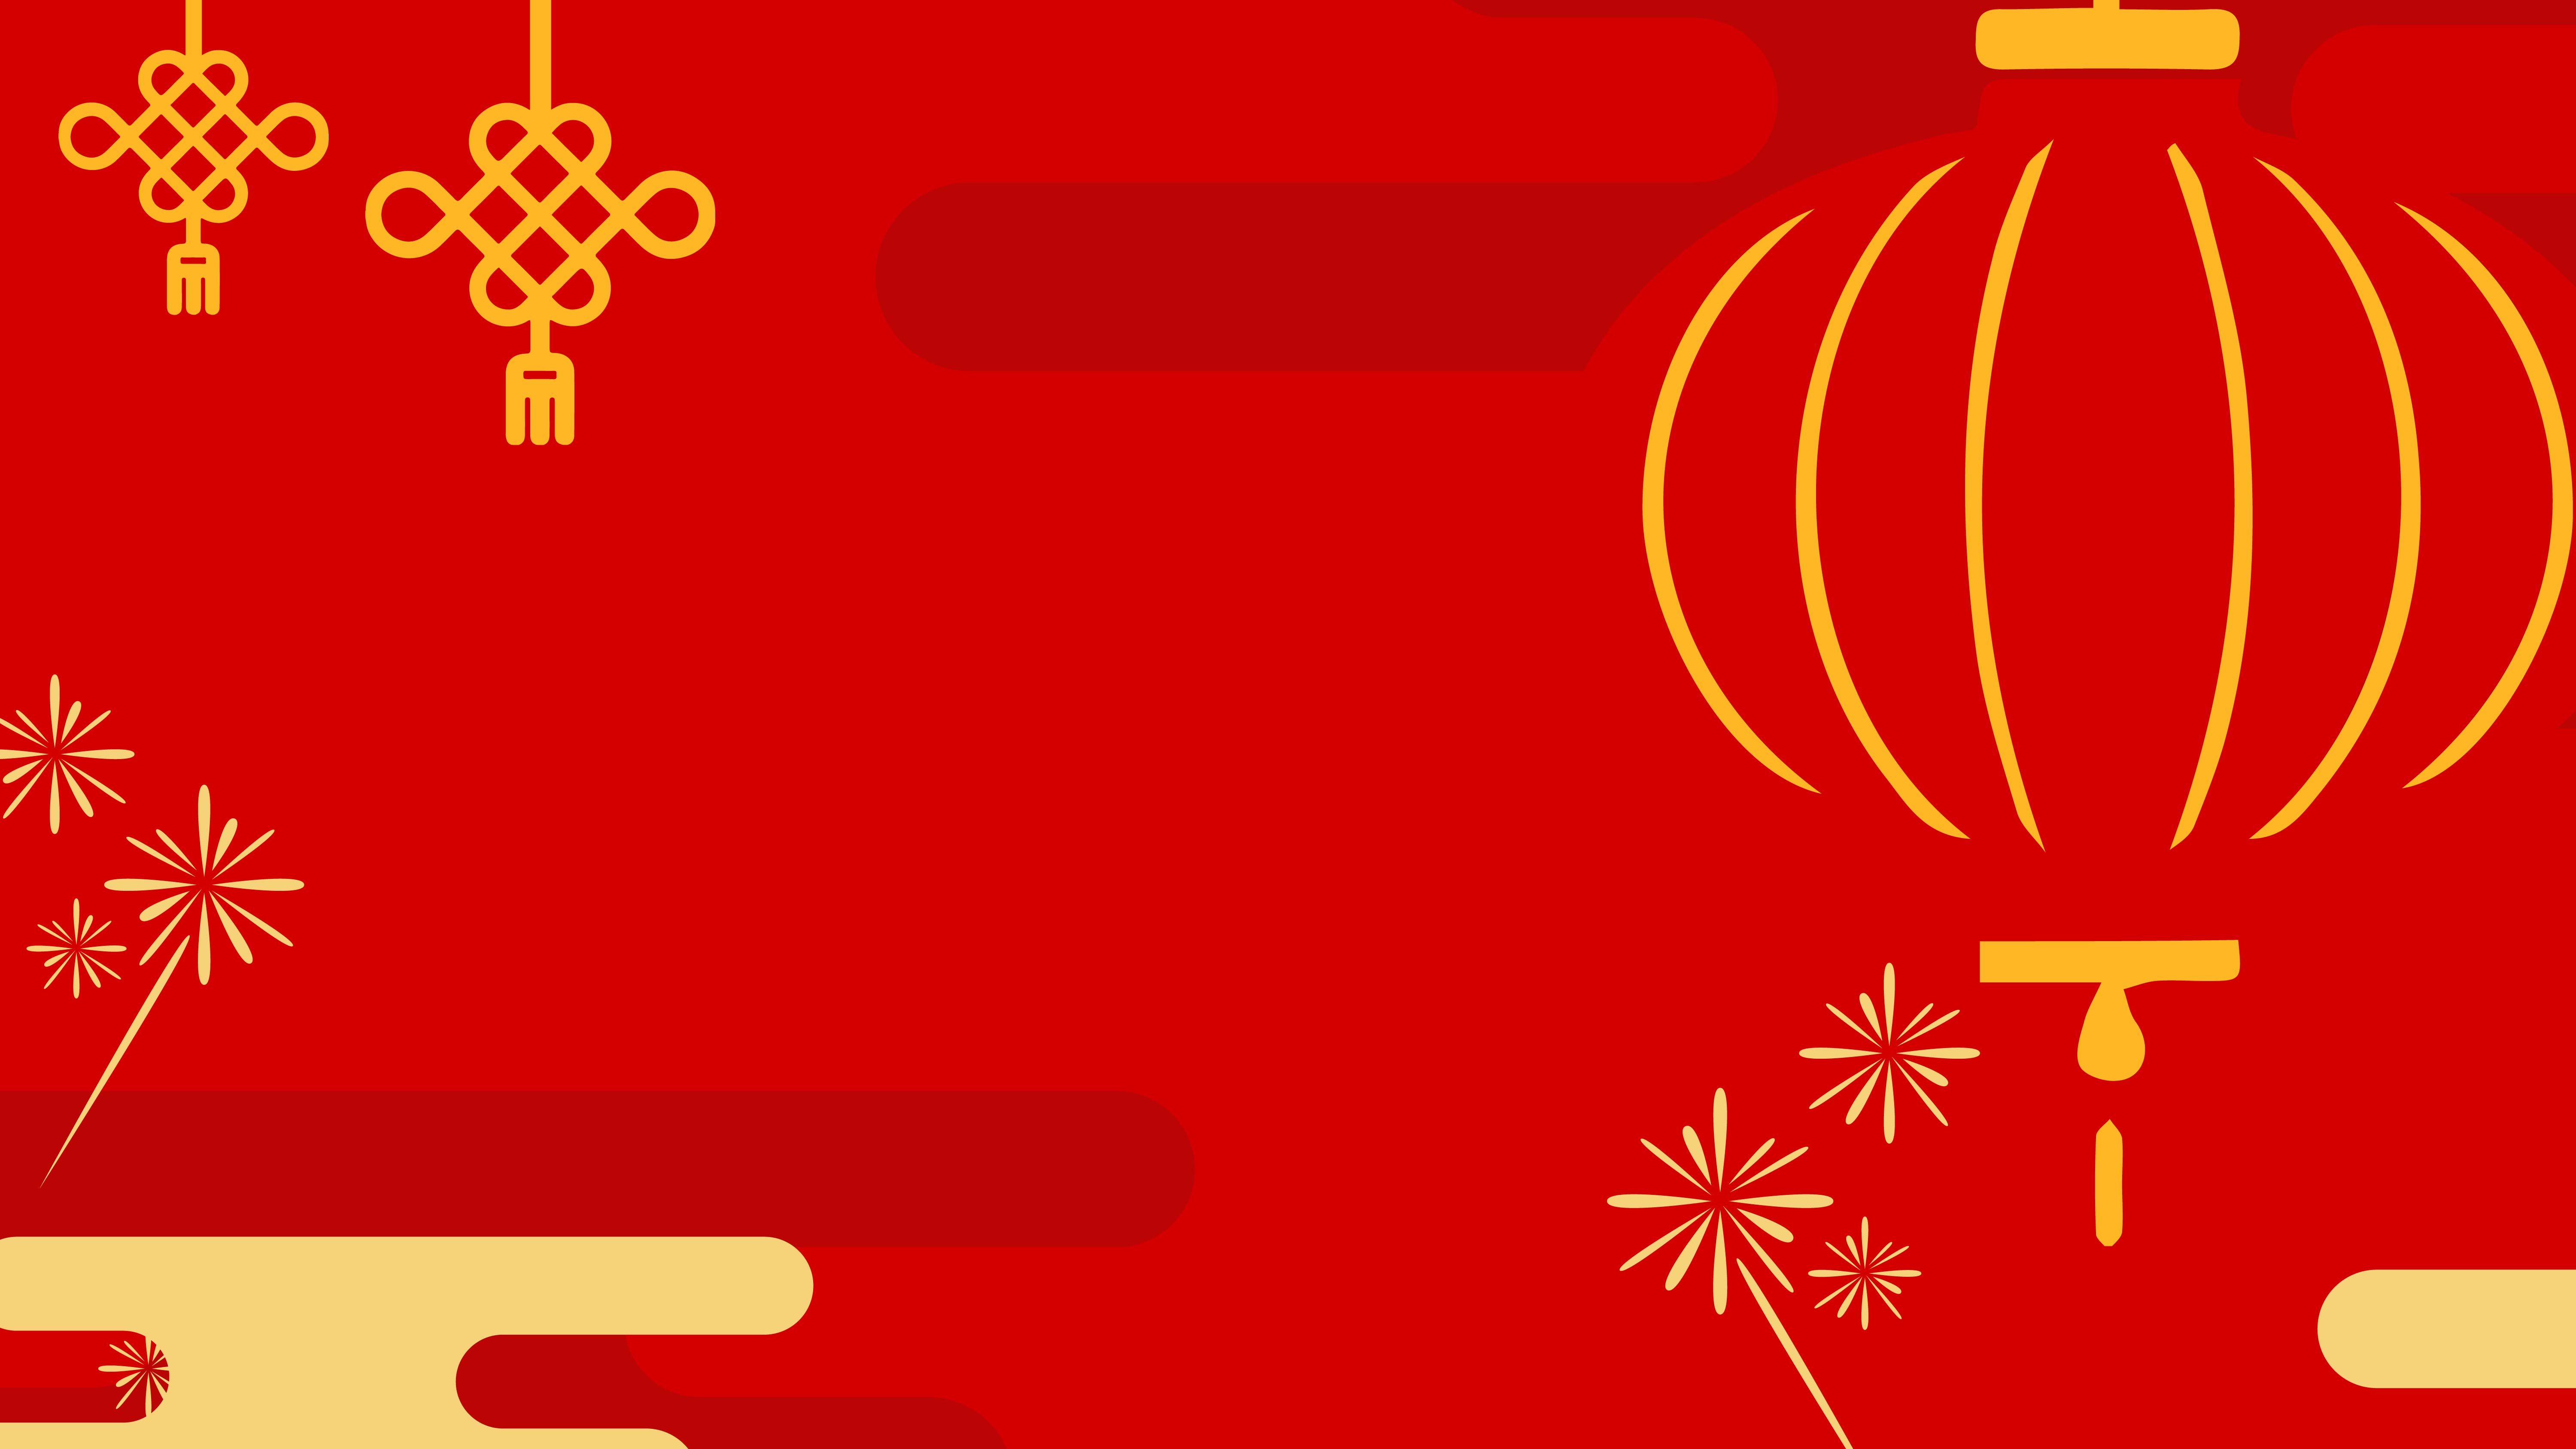 Lunar New Year Banner - Free Vectors & PSDs to Download